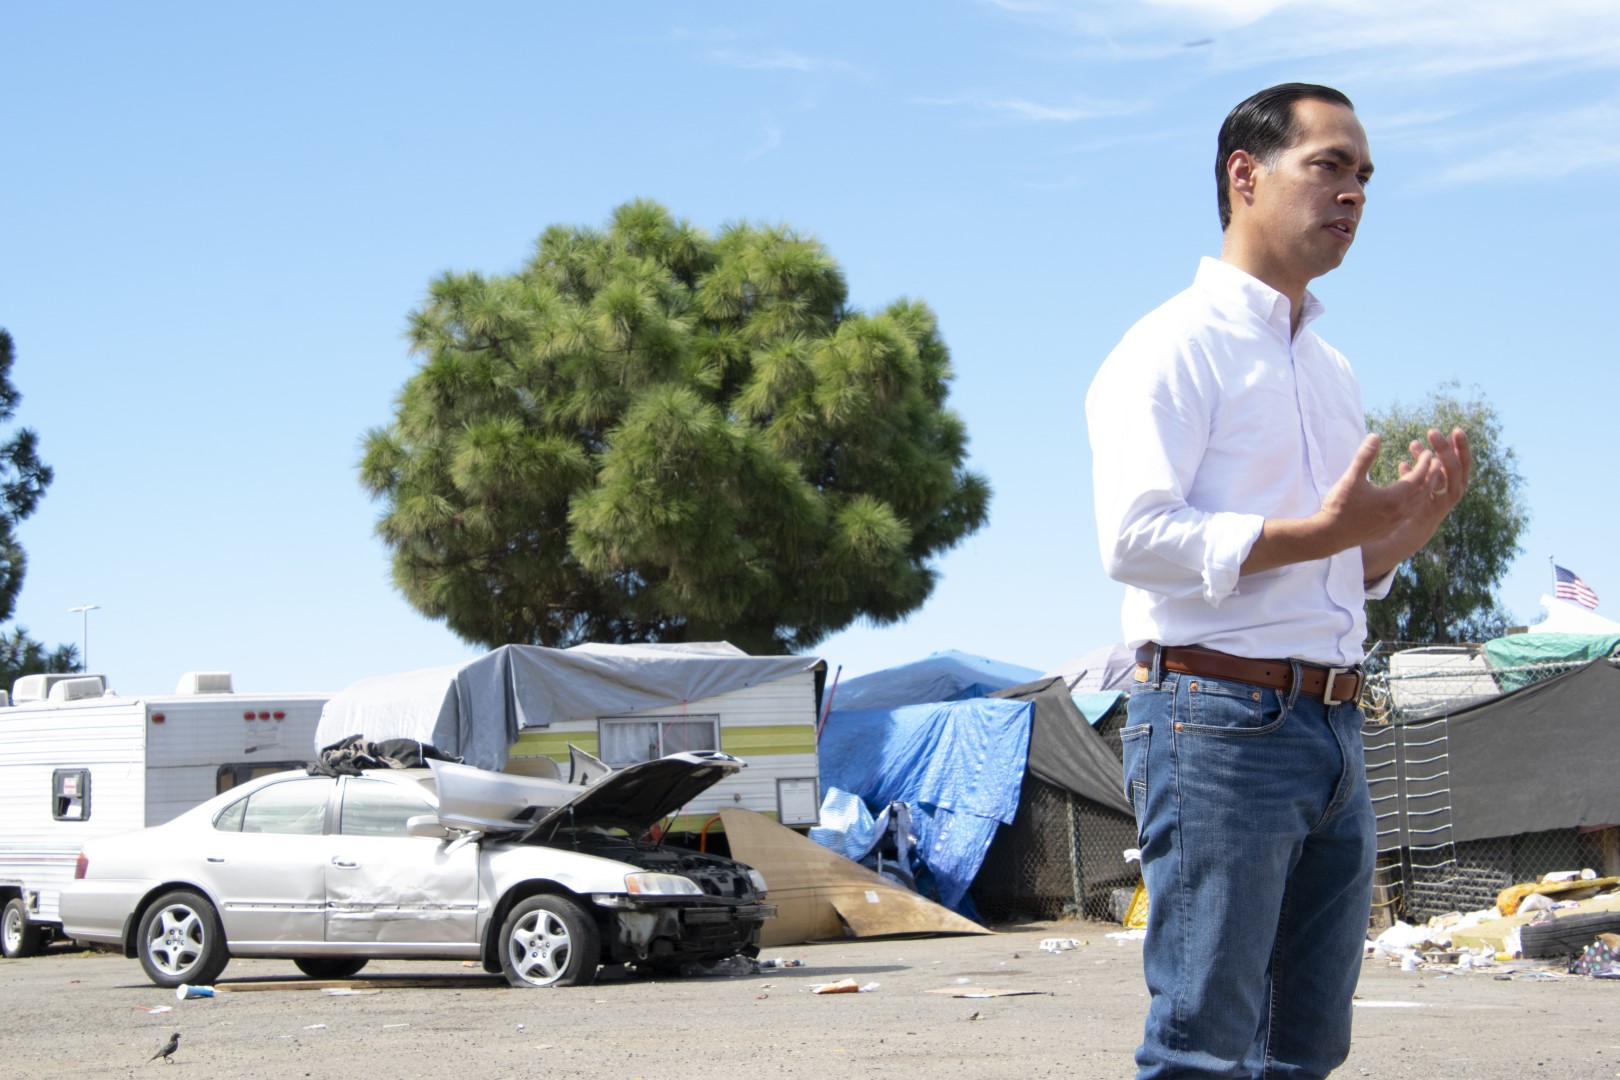 Democratic Presidential Candidate Julián Castro speaks at an Oakland homeless encampment on Sept. 25. Photo by Scott Morris